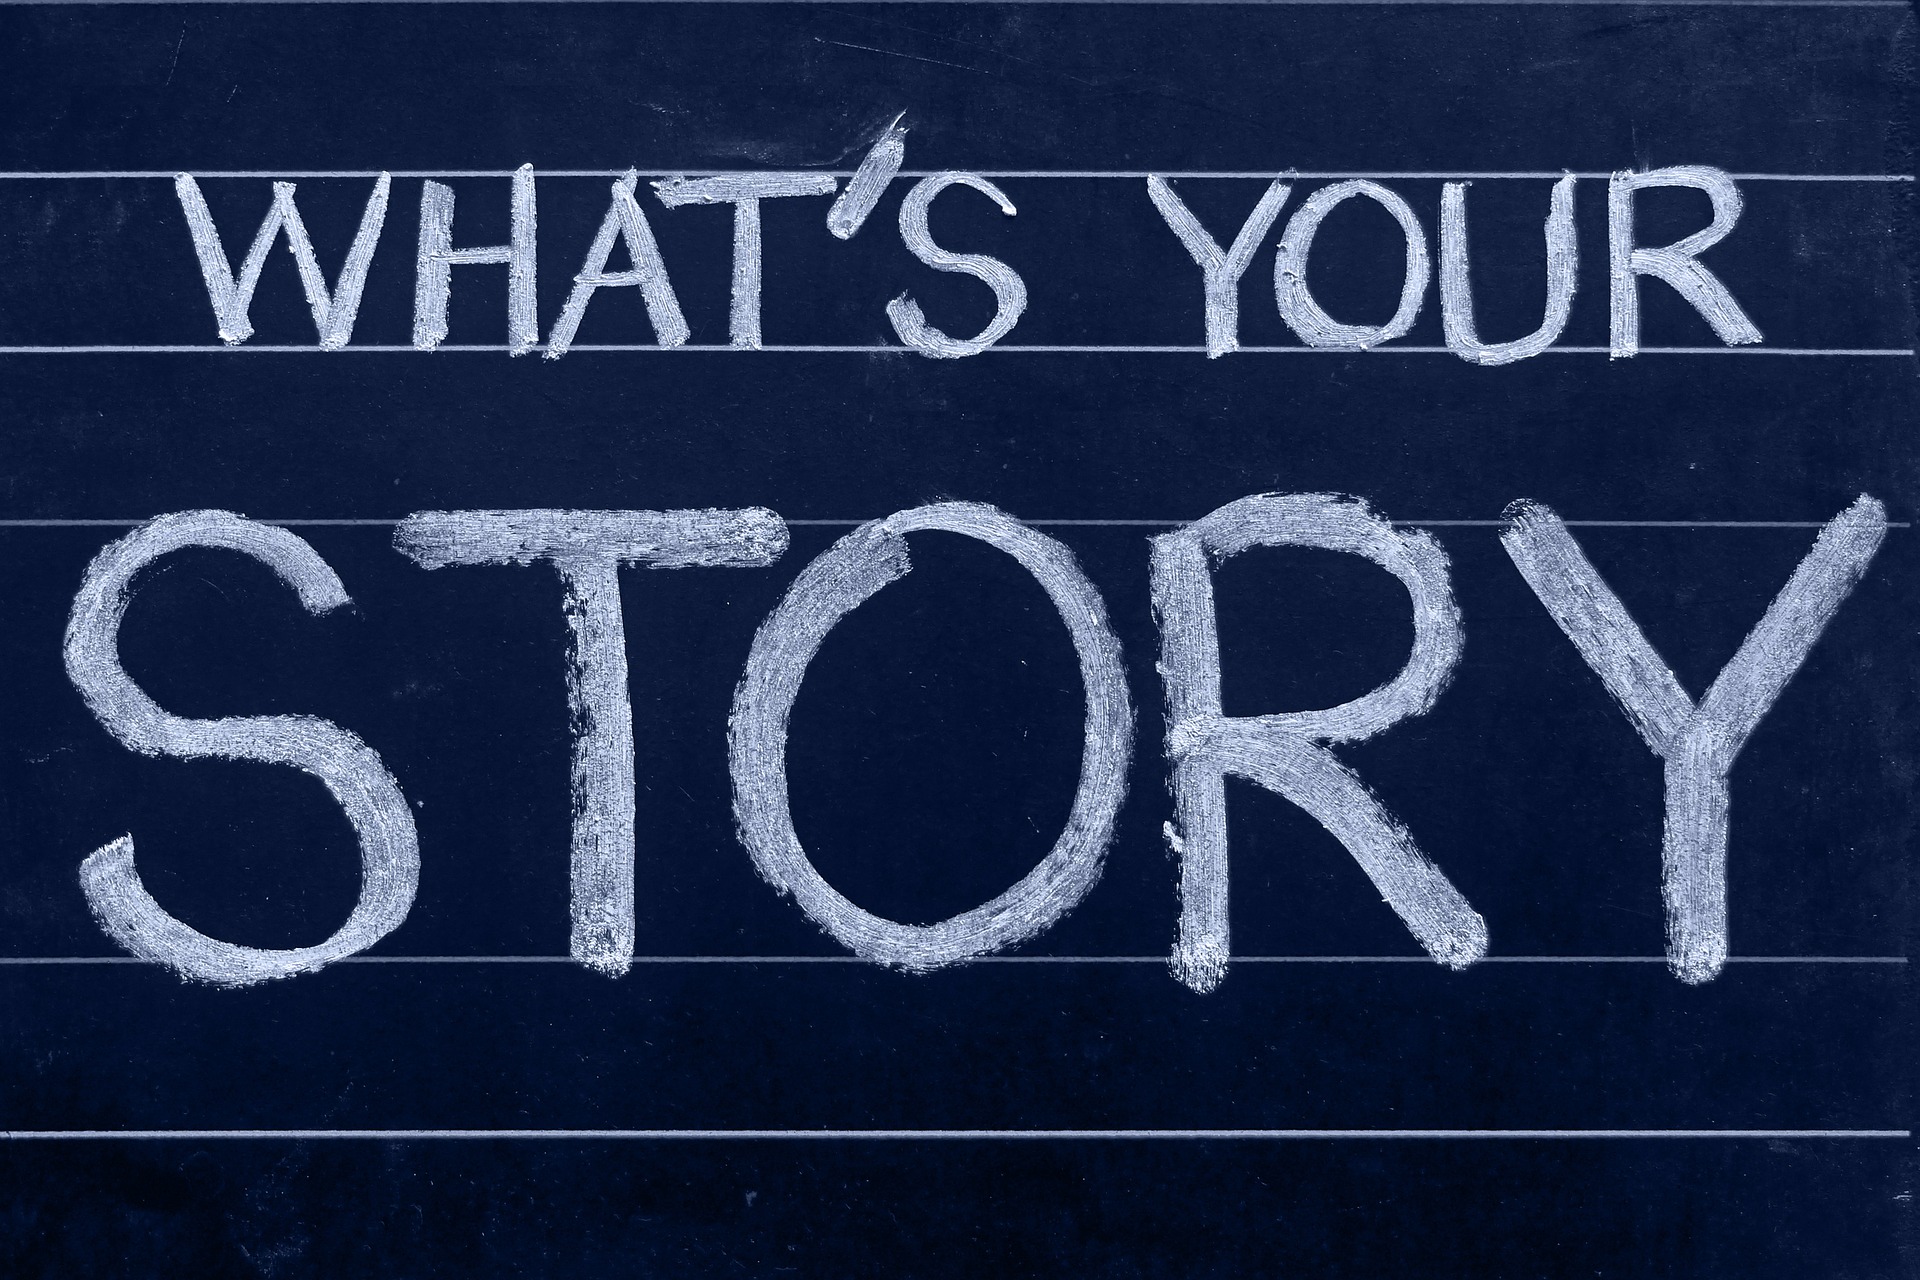 what's your story, getting to know your staff